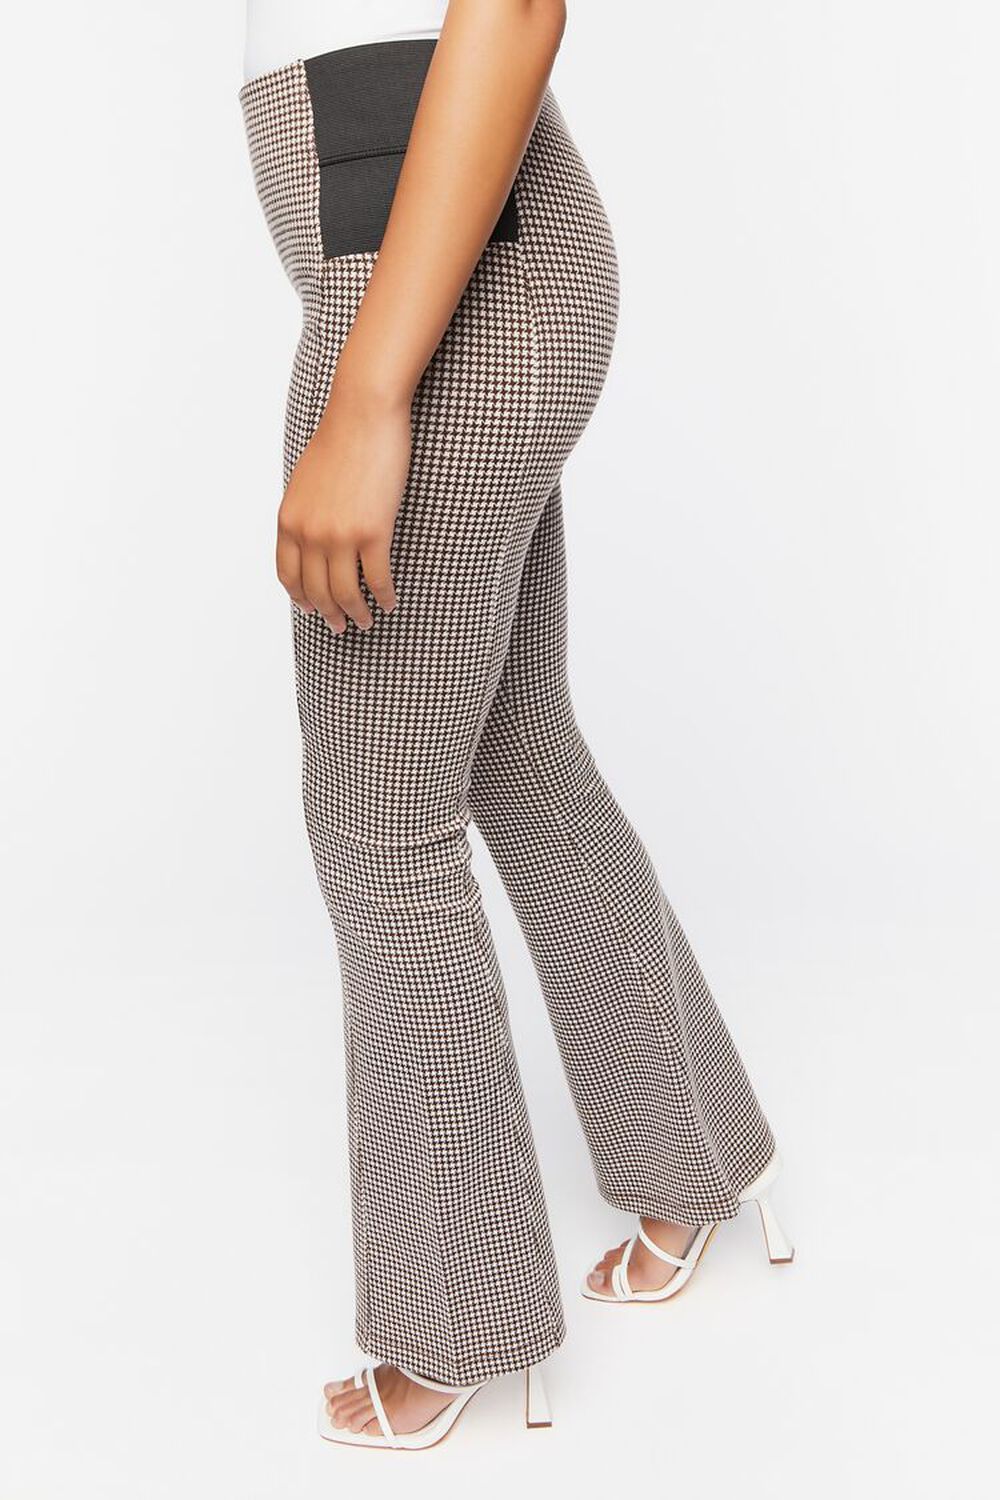 BROWN/CREAM Houndstooth Flare-Leg Pants, image 3